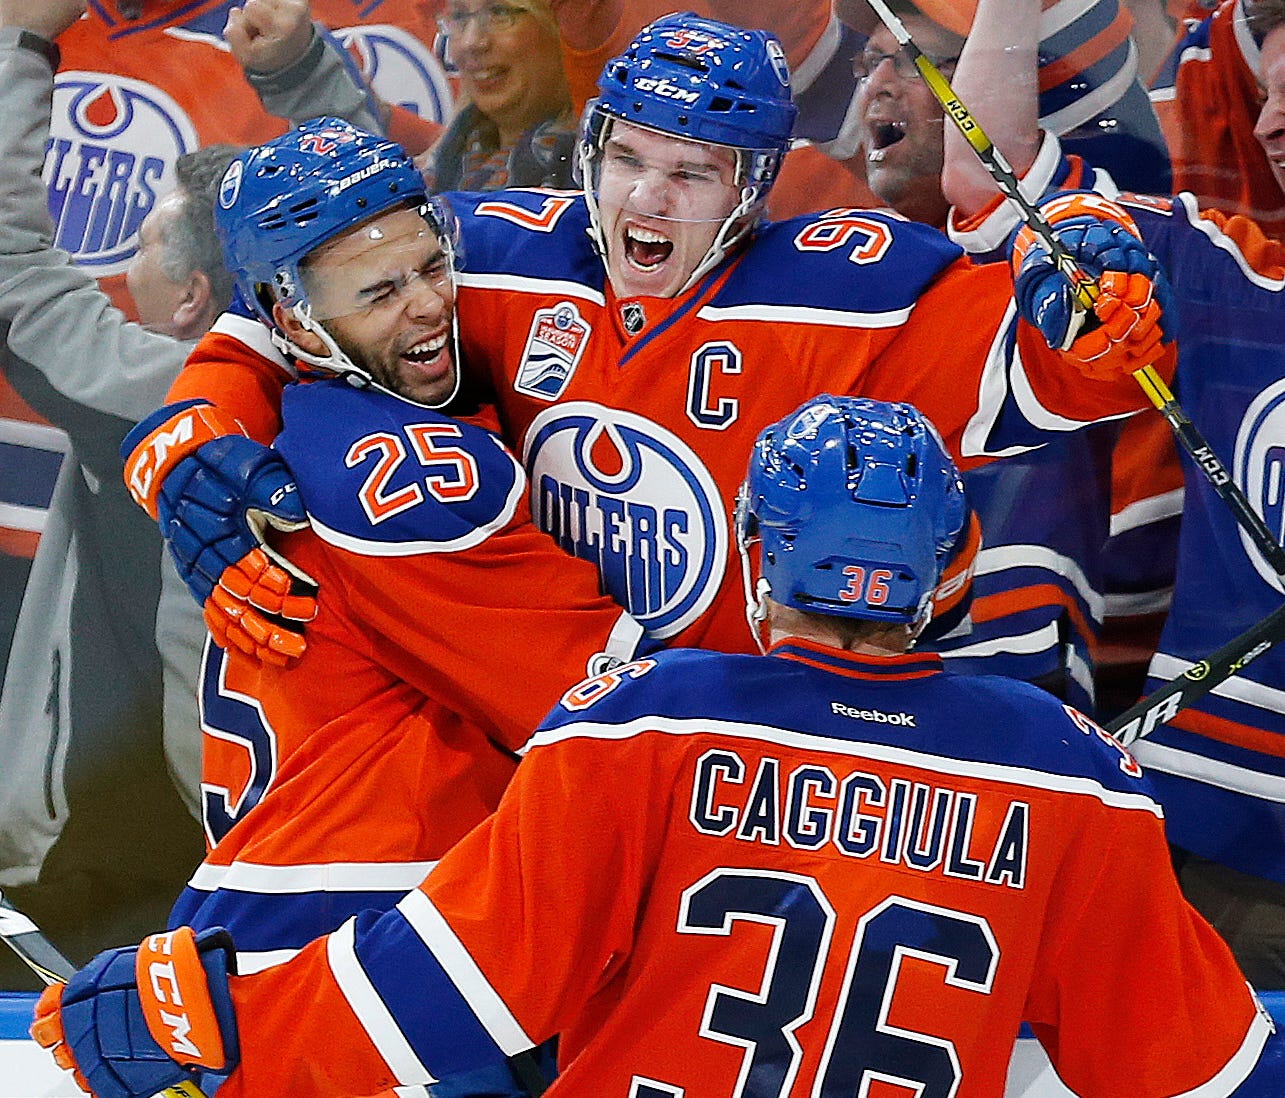 Edmonton Oilers forward Connor McDavid and his teammates expect more moments like this in 2017-18.